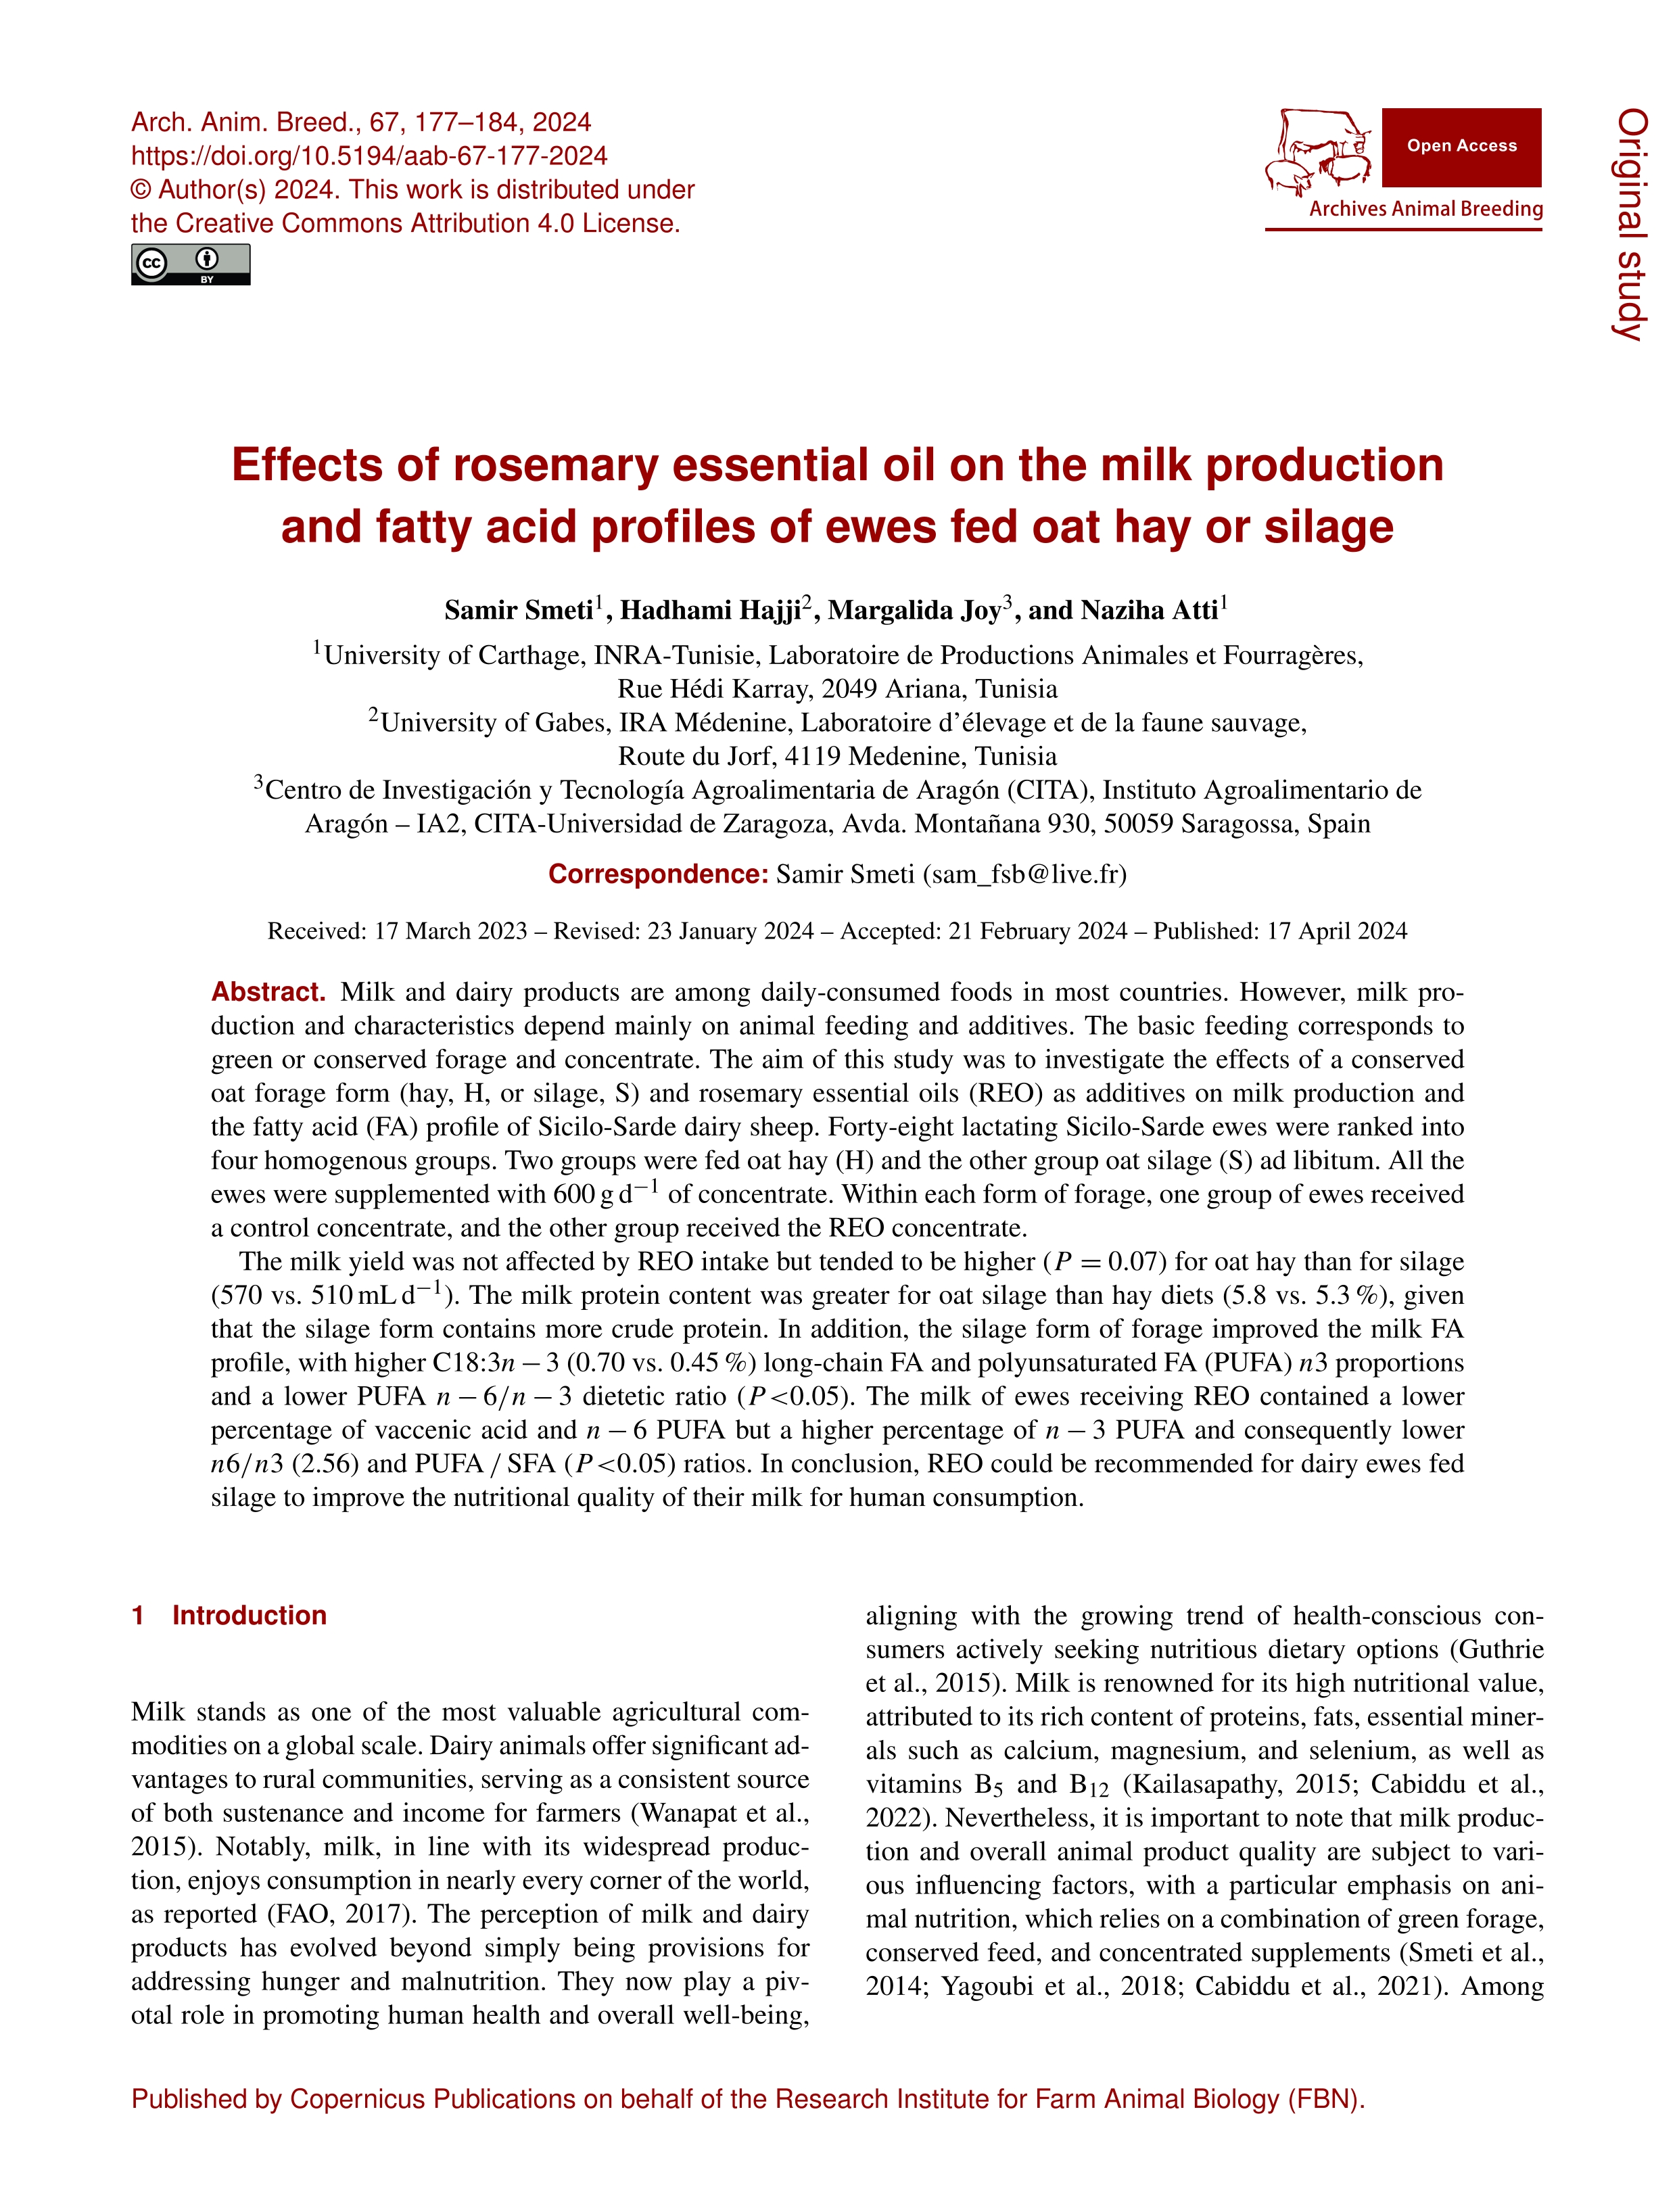 Effects of rosemary essential oil on the milk production and fatty acid profiles of ewes fed oat hay or silage